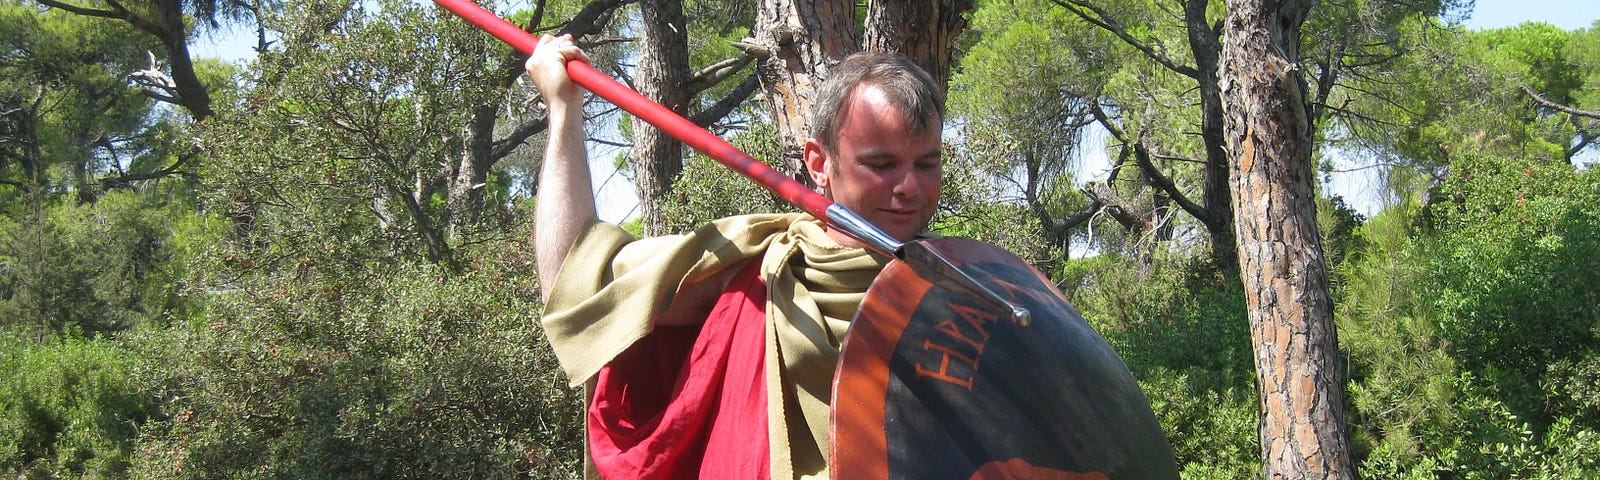 A man with a Hoplite spear and sheeld